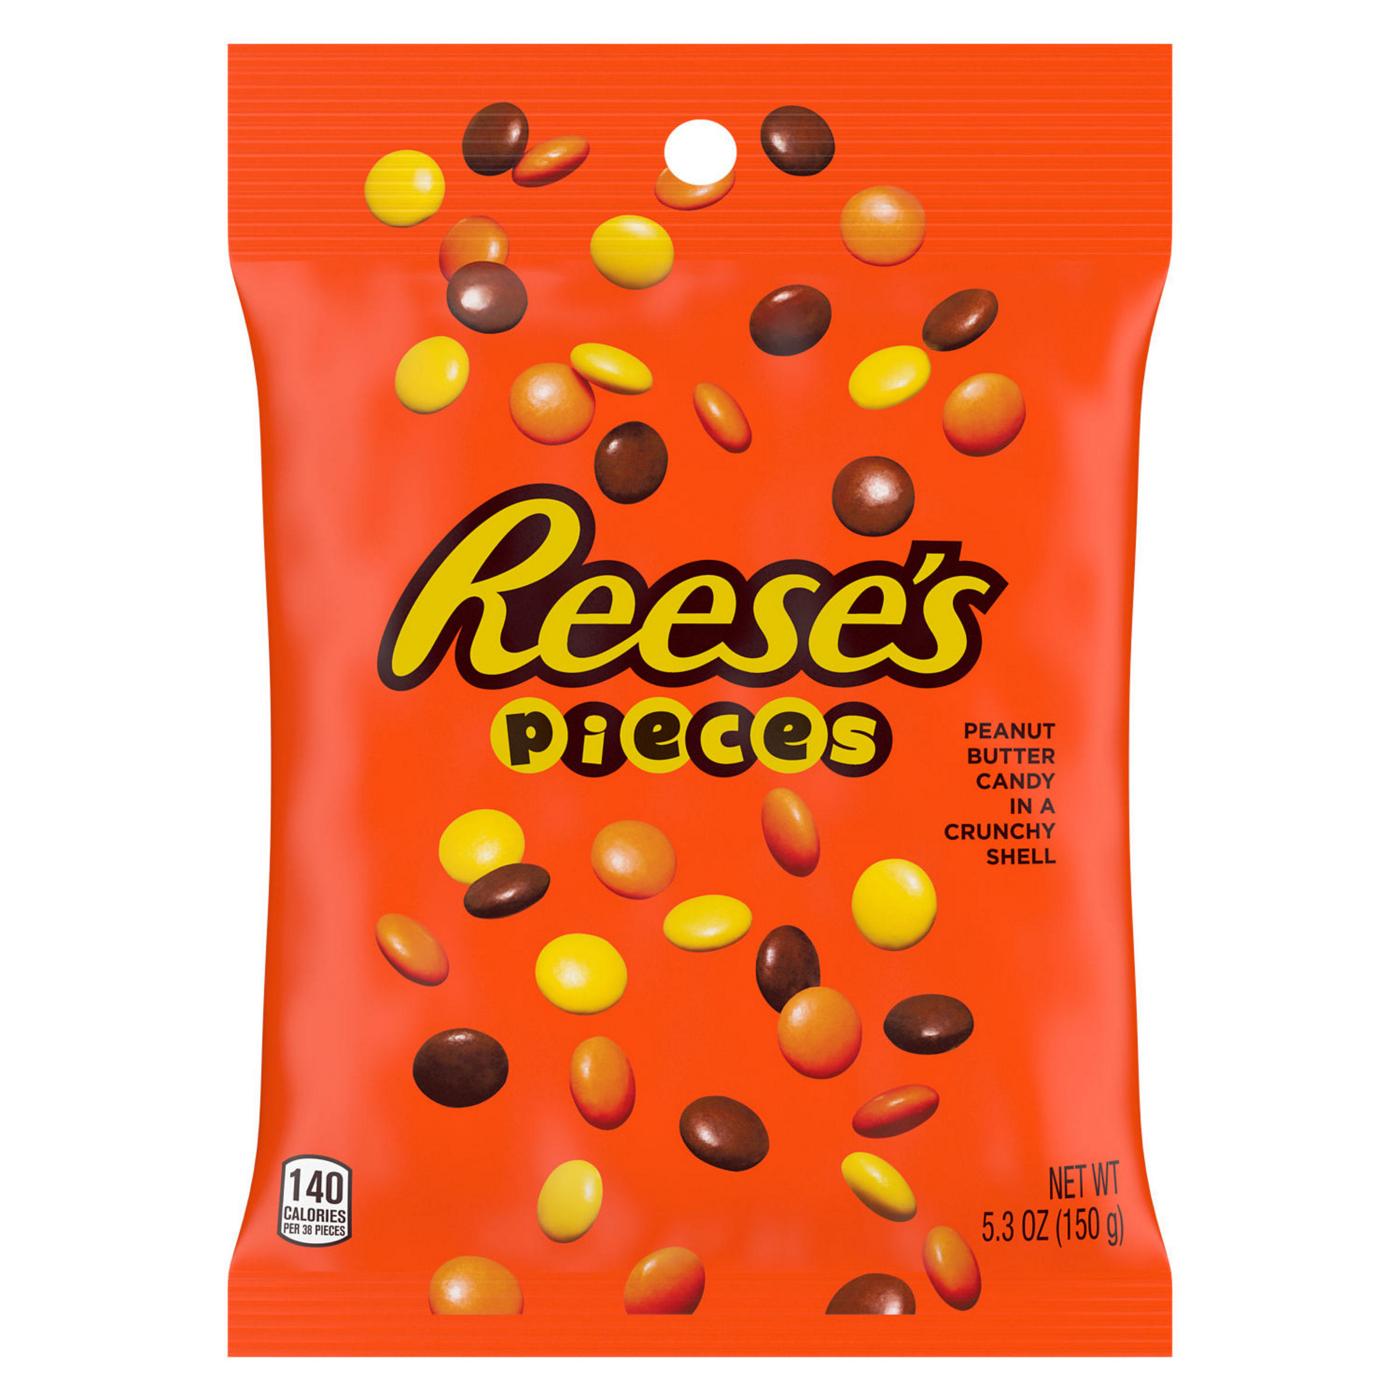 Reese's Pieces Peanut Butter Candy; image 1 of 4